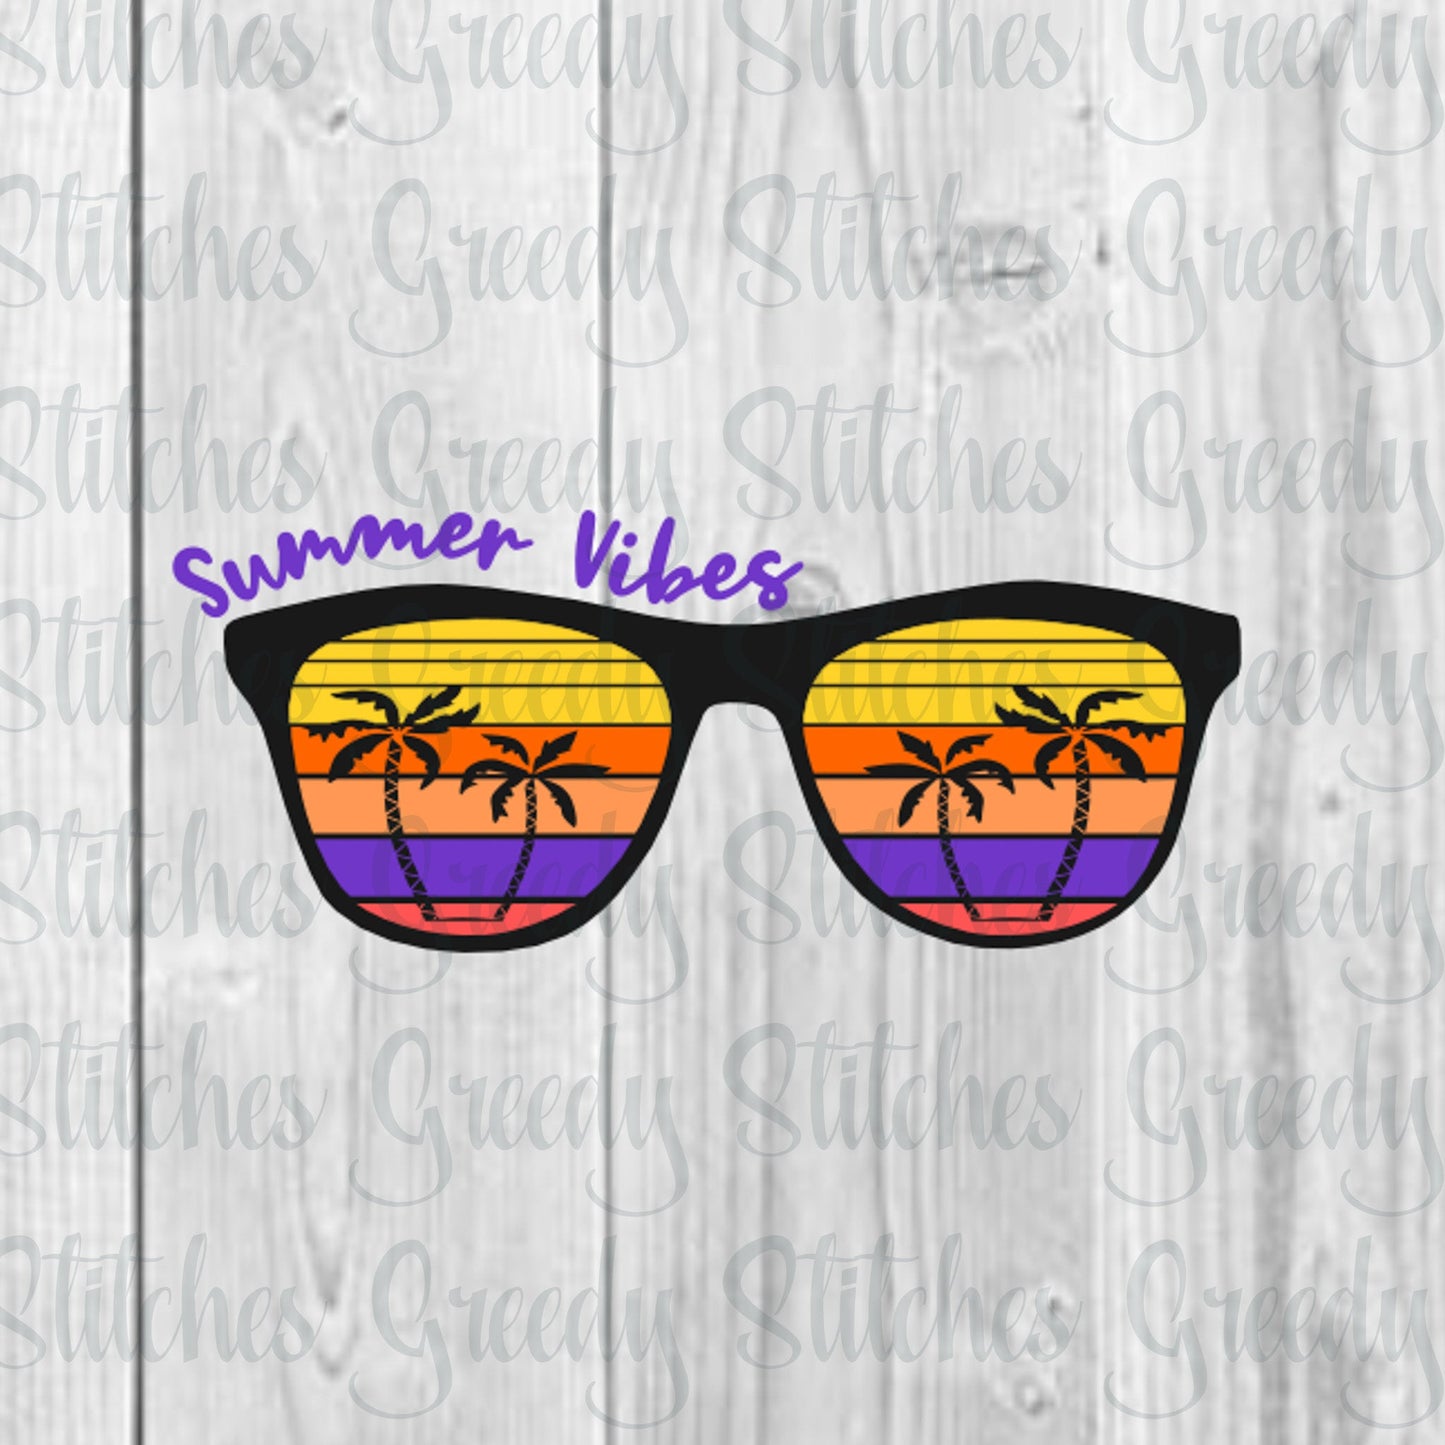 Sunglasses with Sunset and Palm Trees SVG | Summer Vibes SvG | Palm Tree Sunglasses svg, dxf, eps, png. Summer | Instant Download Cut Files.